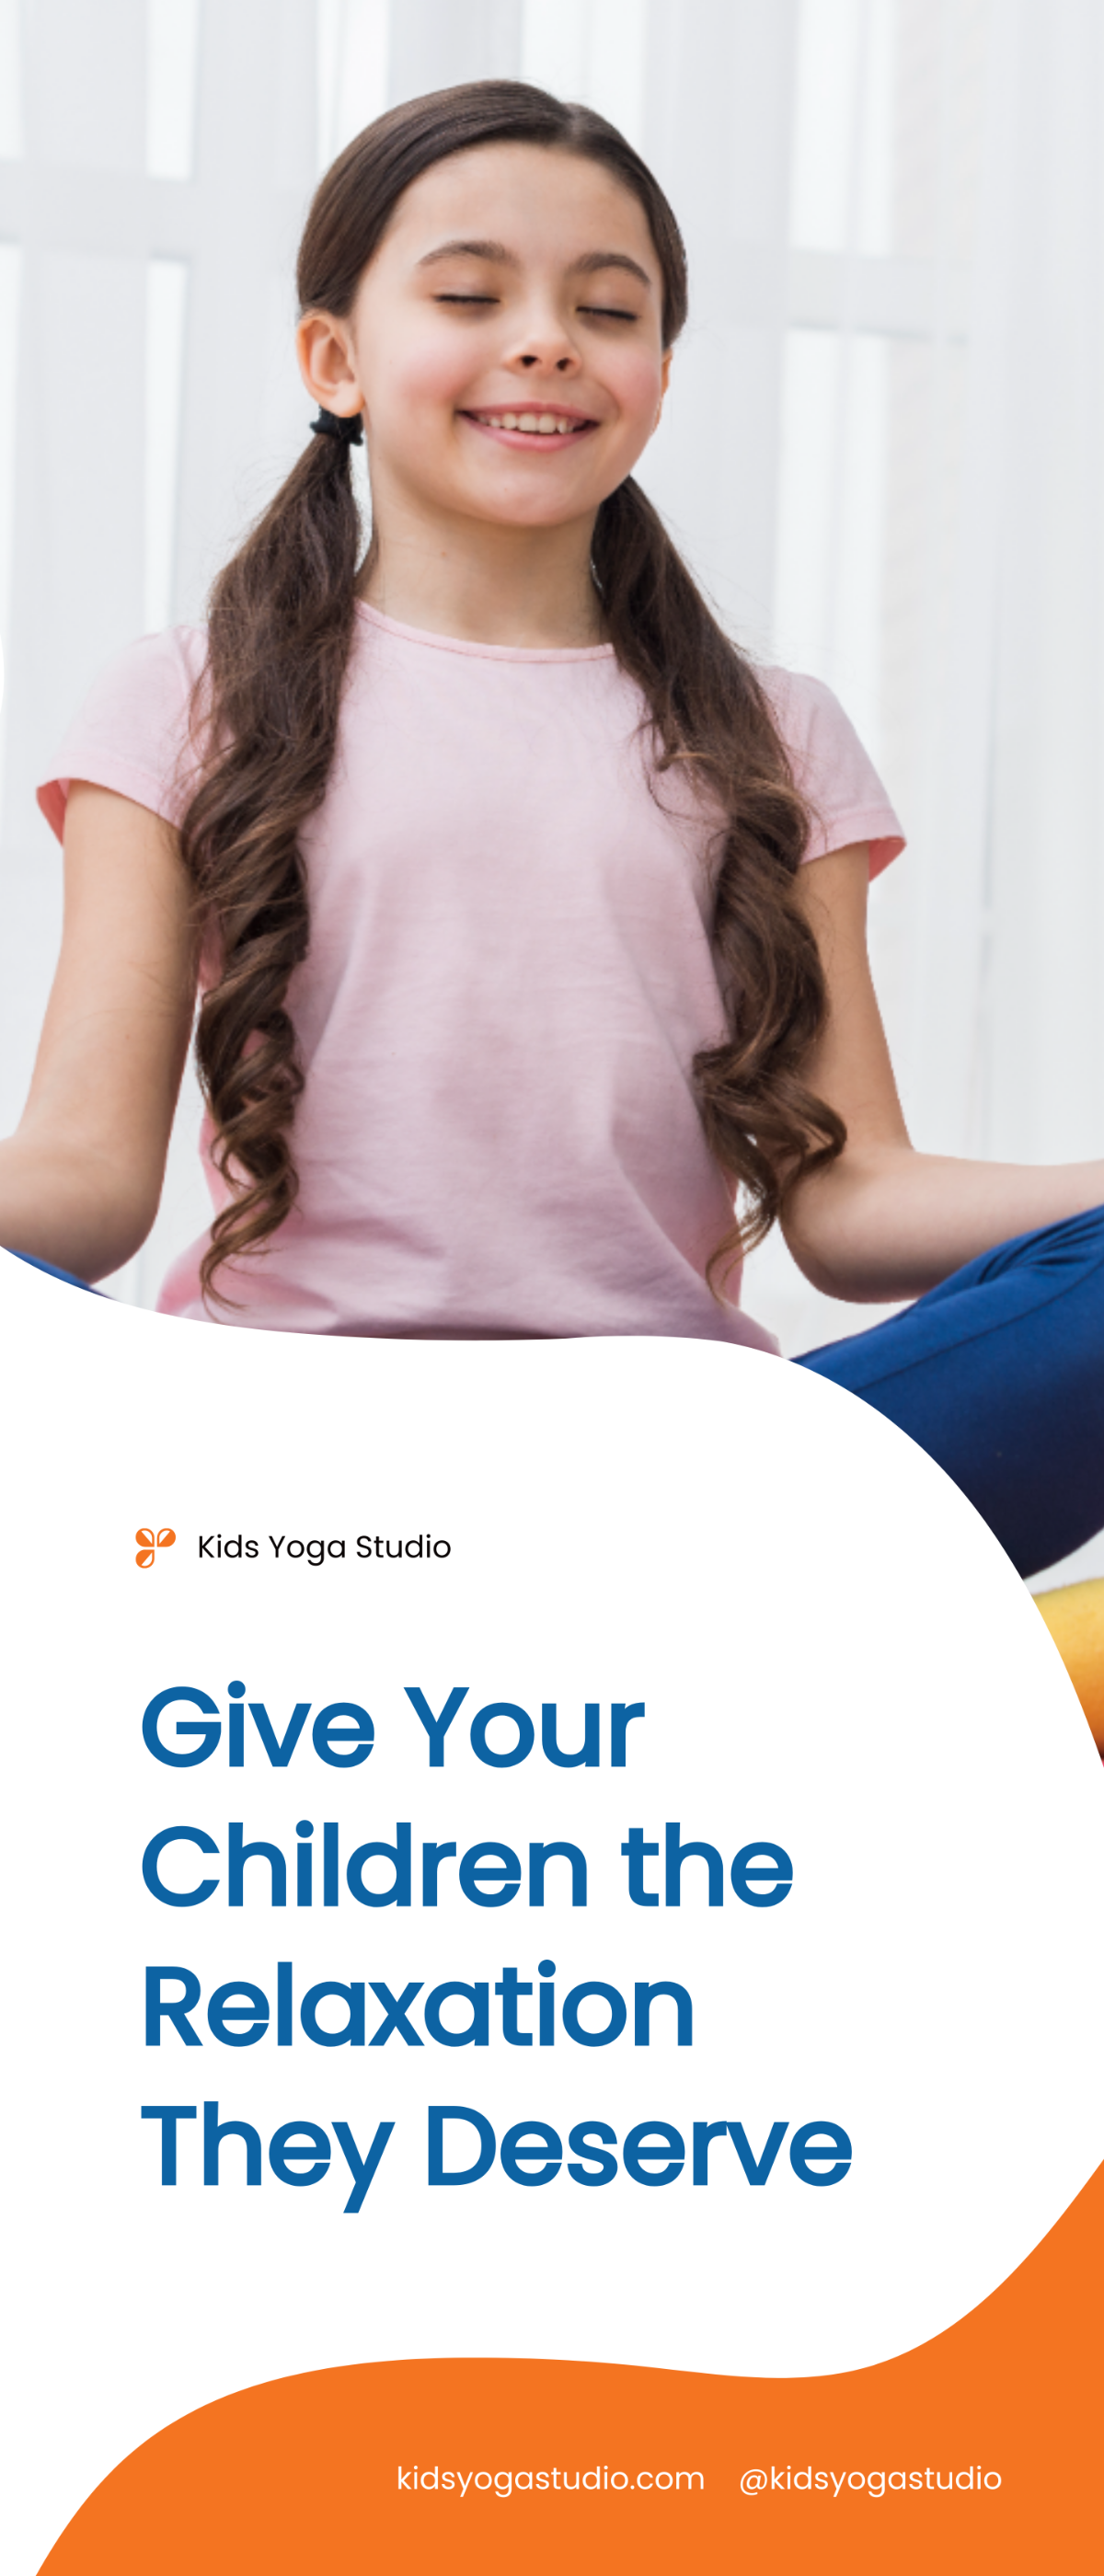 Free Kids Yoga Roll Up Banner Template